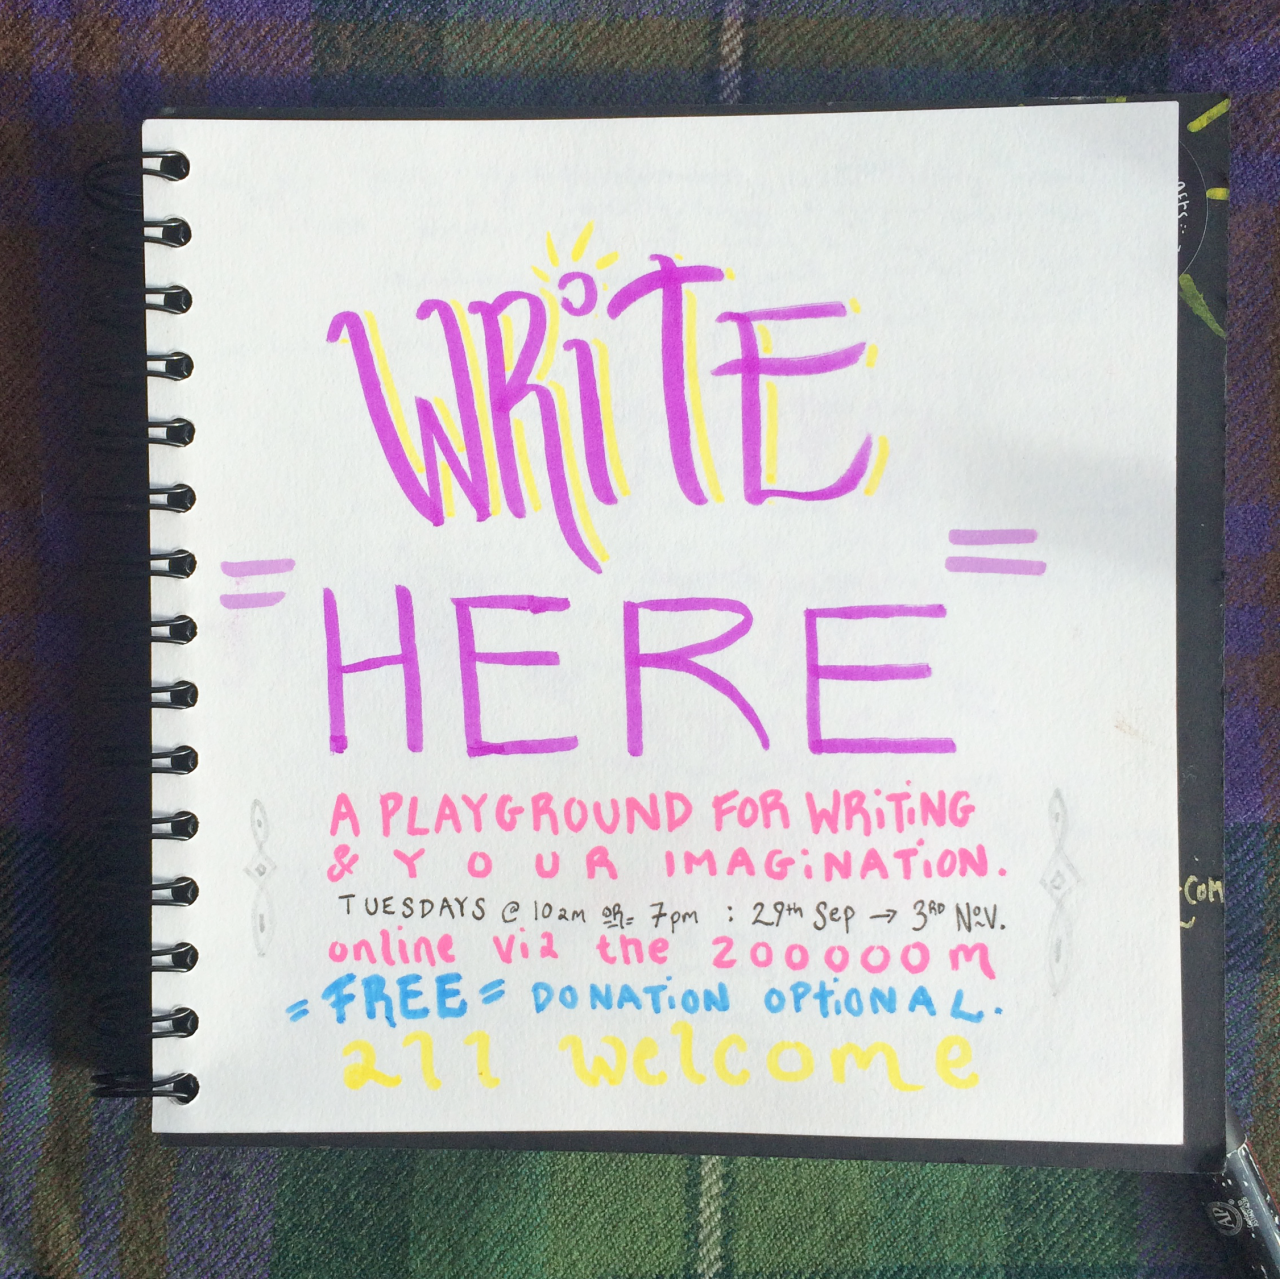 Write Here is a community creative writing playground. It is suitable for absolute beginners as well as wizened imagineers.
Write Here is a space to loose your imagination, to find new words and worlds.
You’ll be encouraged to explore your unique...